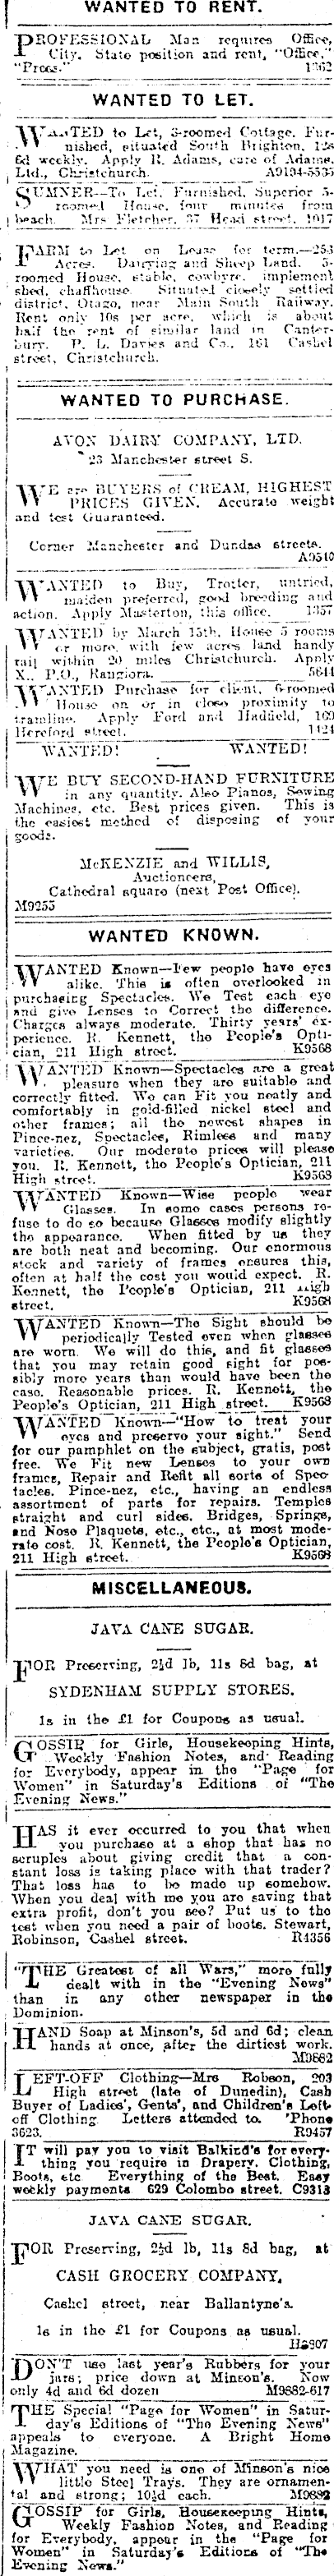 Papers Past Newspapers Press 24 February 1915 Page 9 Advertisements Column 4